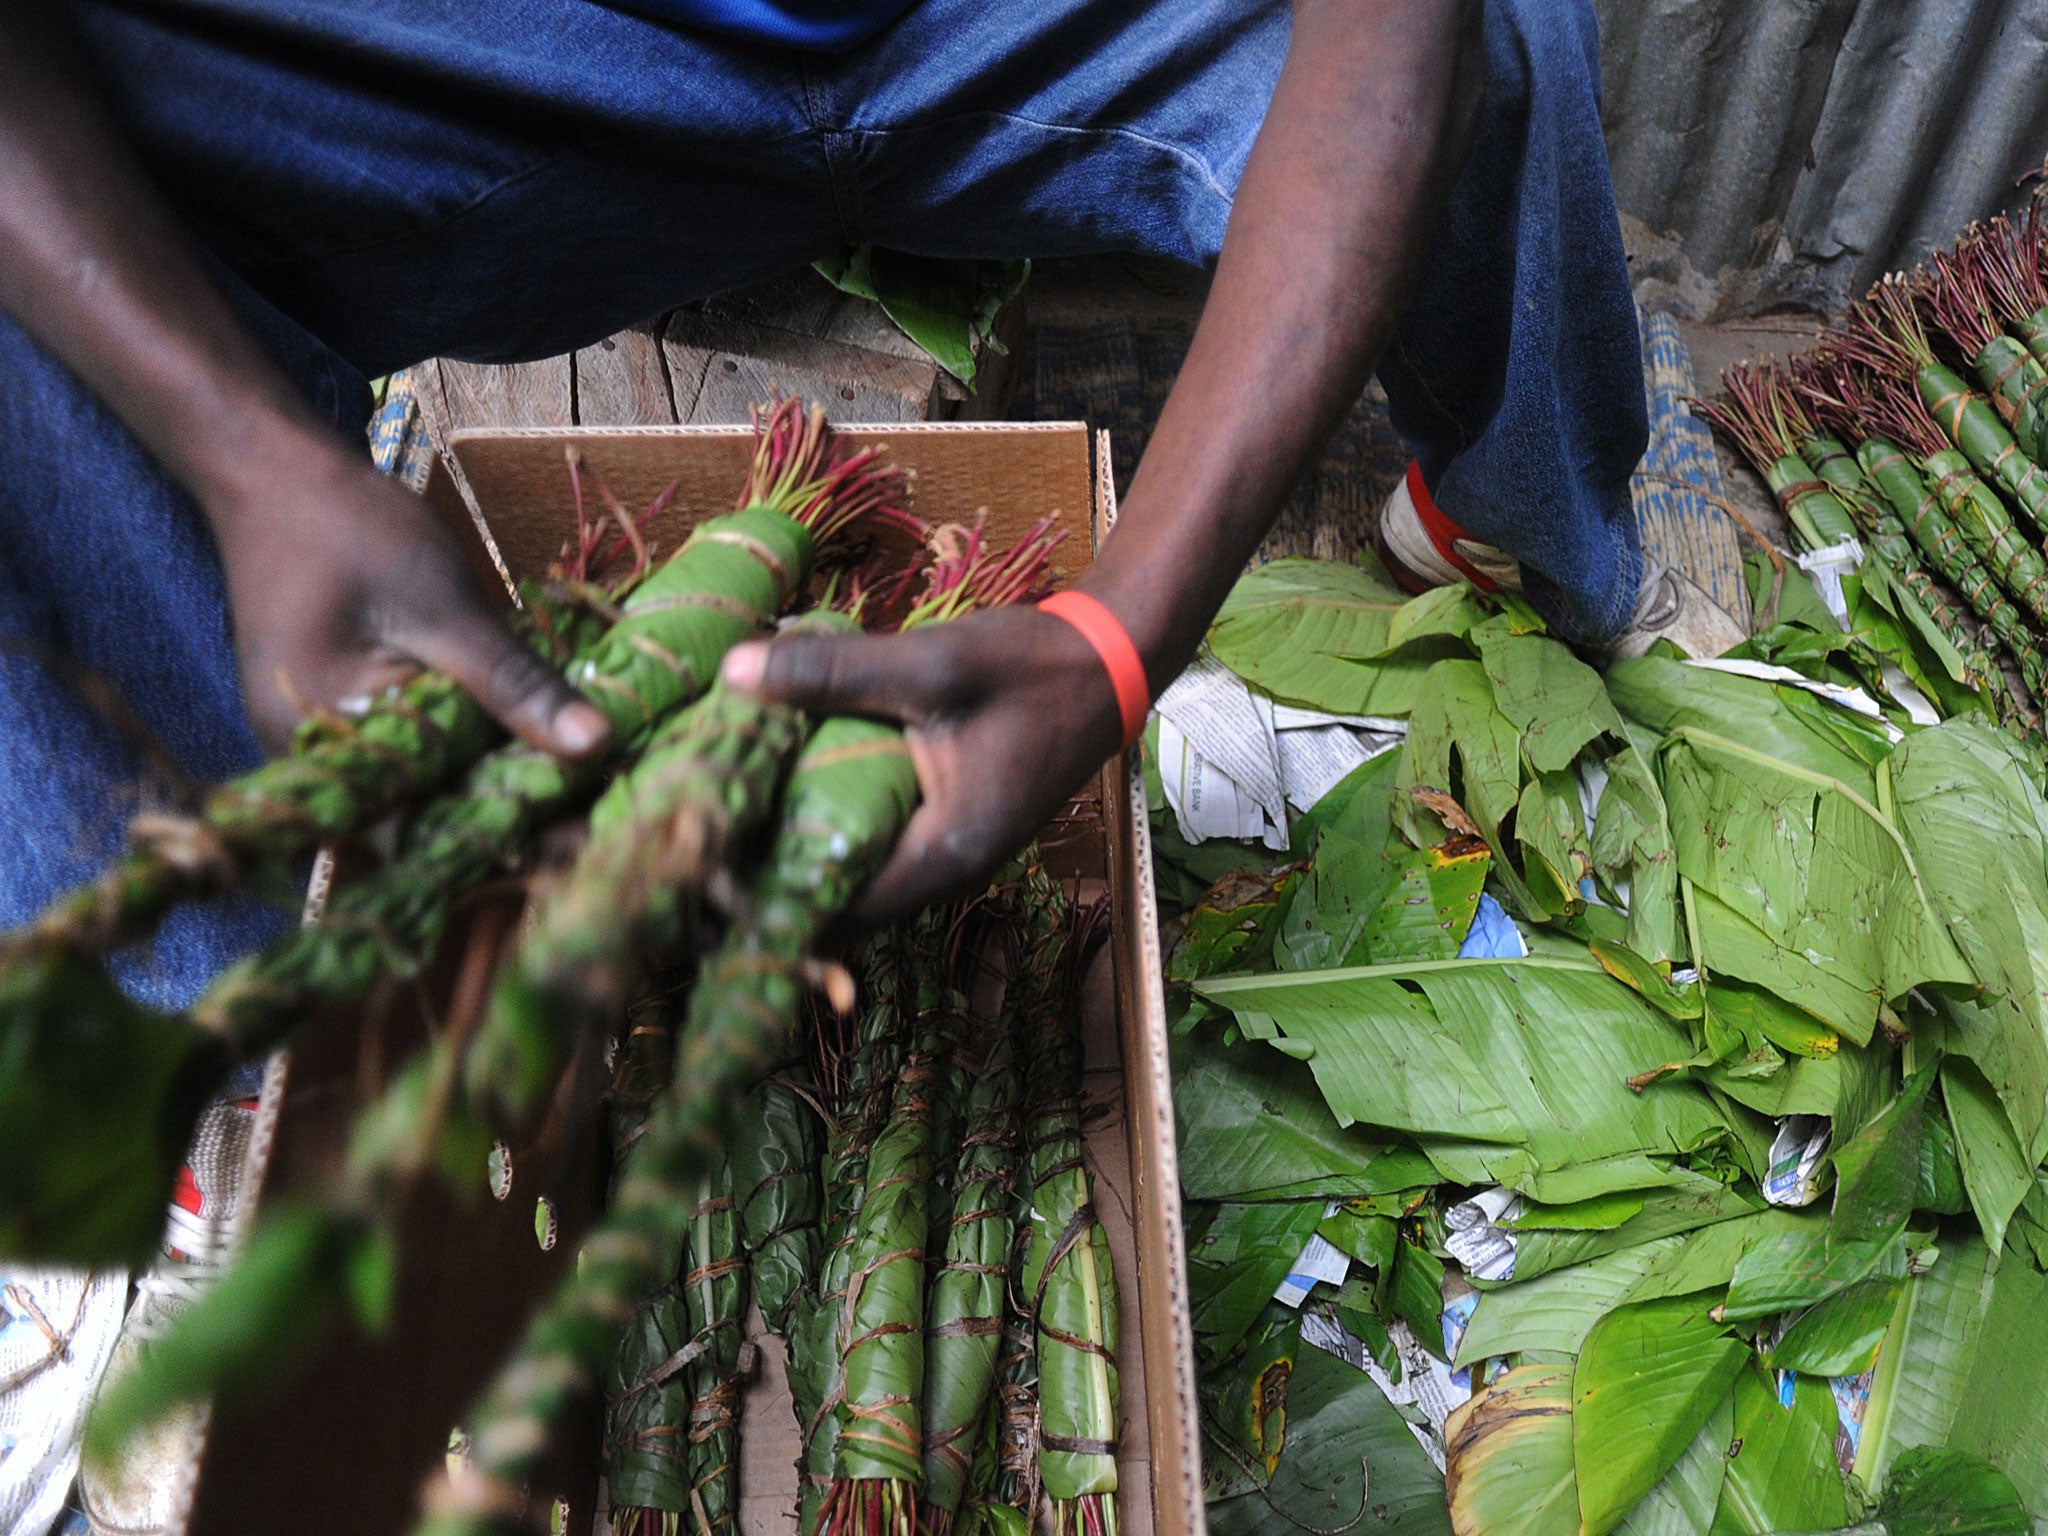 Khat is the leaves and shoots of the shrub Catha edulis, which are chewed to obtain a mild stimulant effect (AFP/Getty)